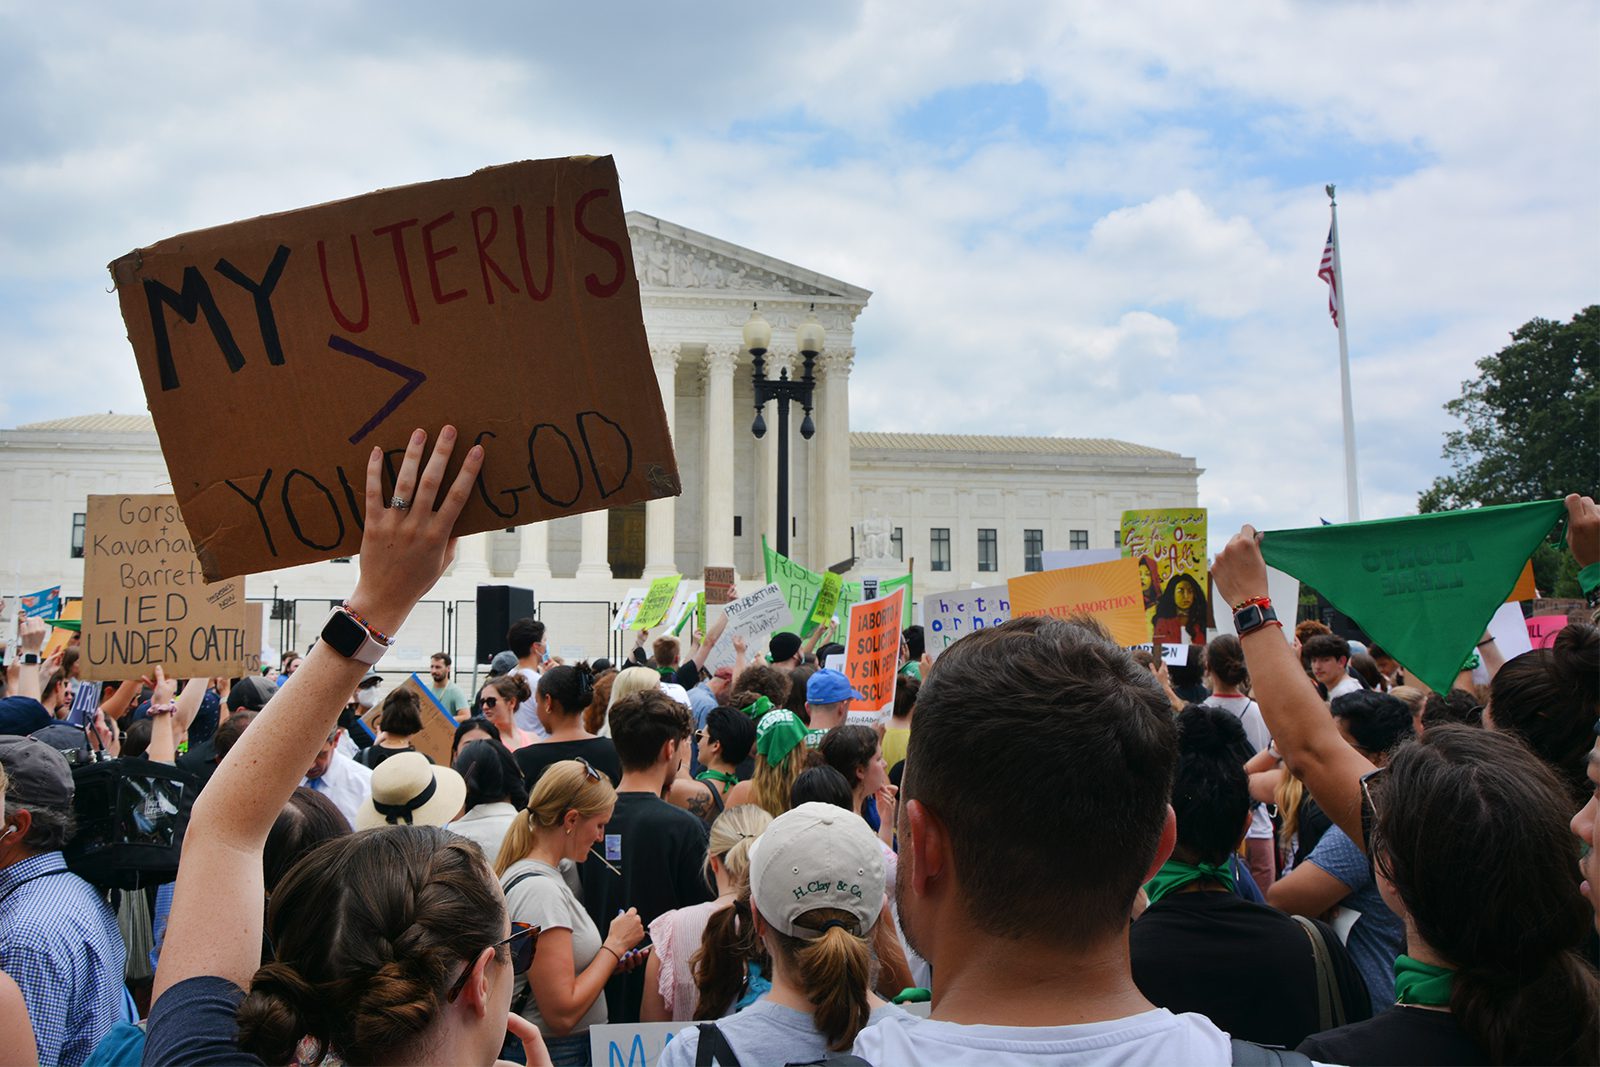 People gather outside the Supreme Court building in Washington, Friday, June 24, 2022, following the Supreme Court's decision to overturn Roe v. Wade, the federally protected right to abortion. RNS photo by Jack Jenkins